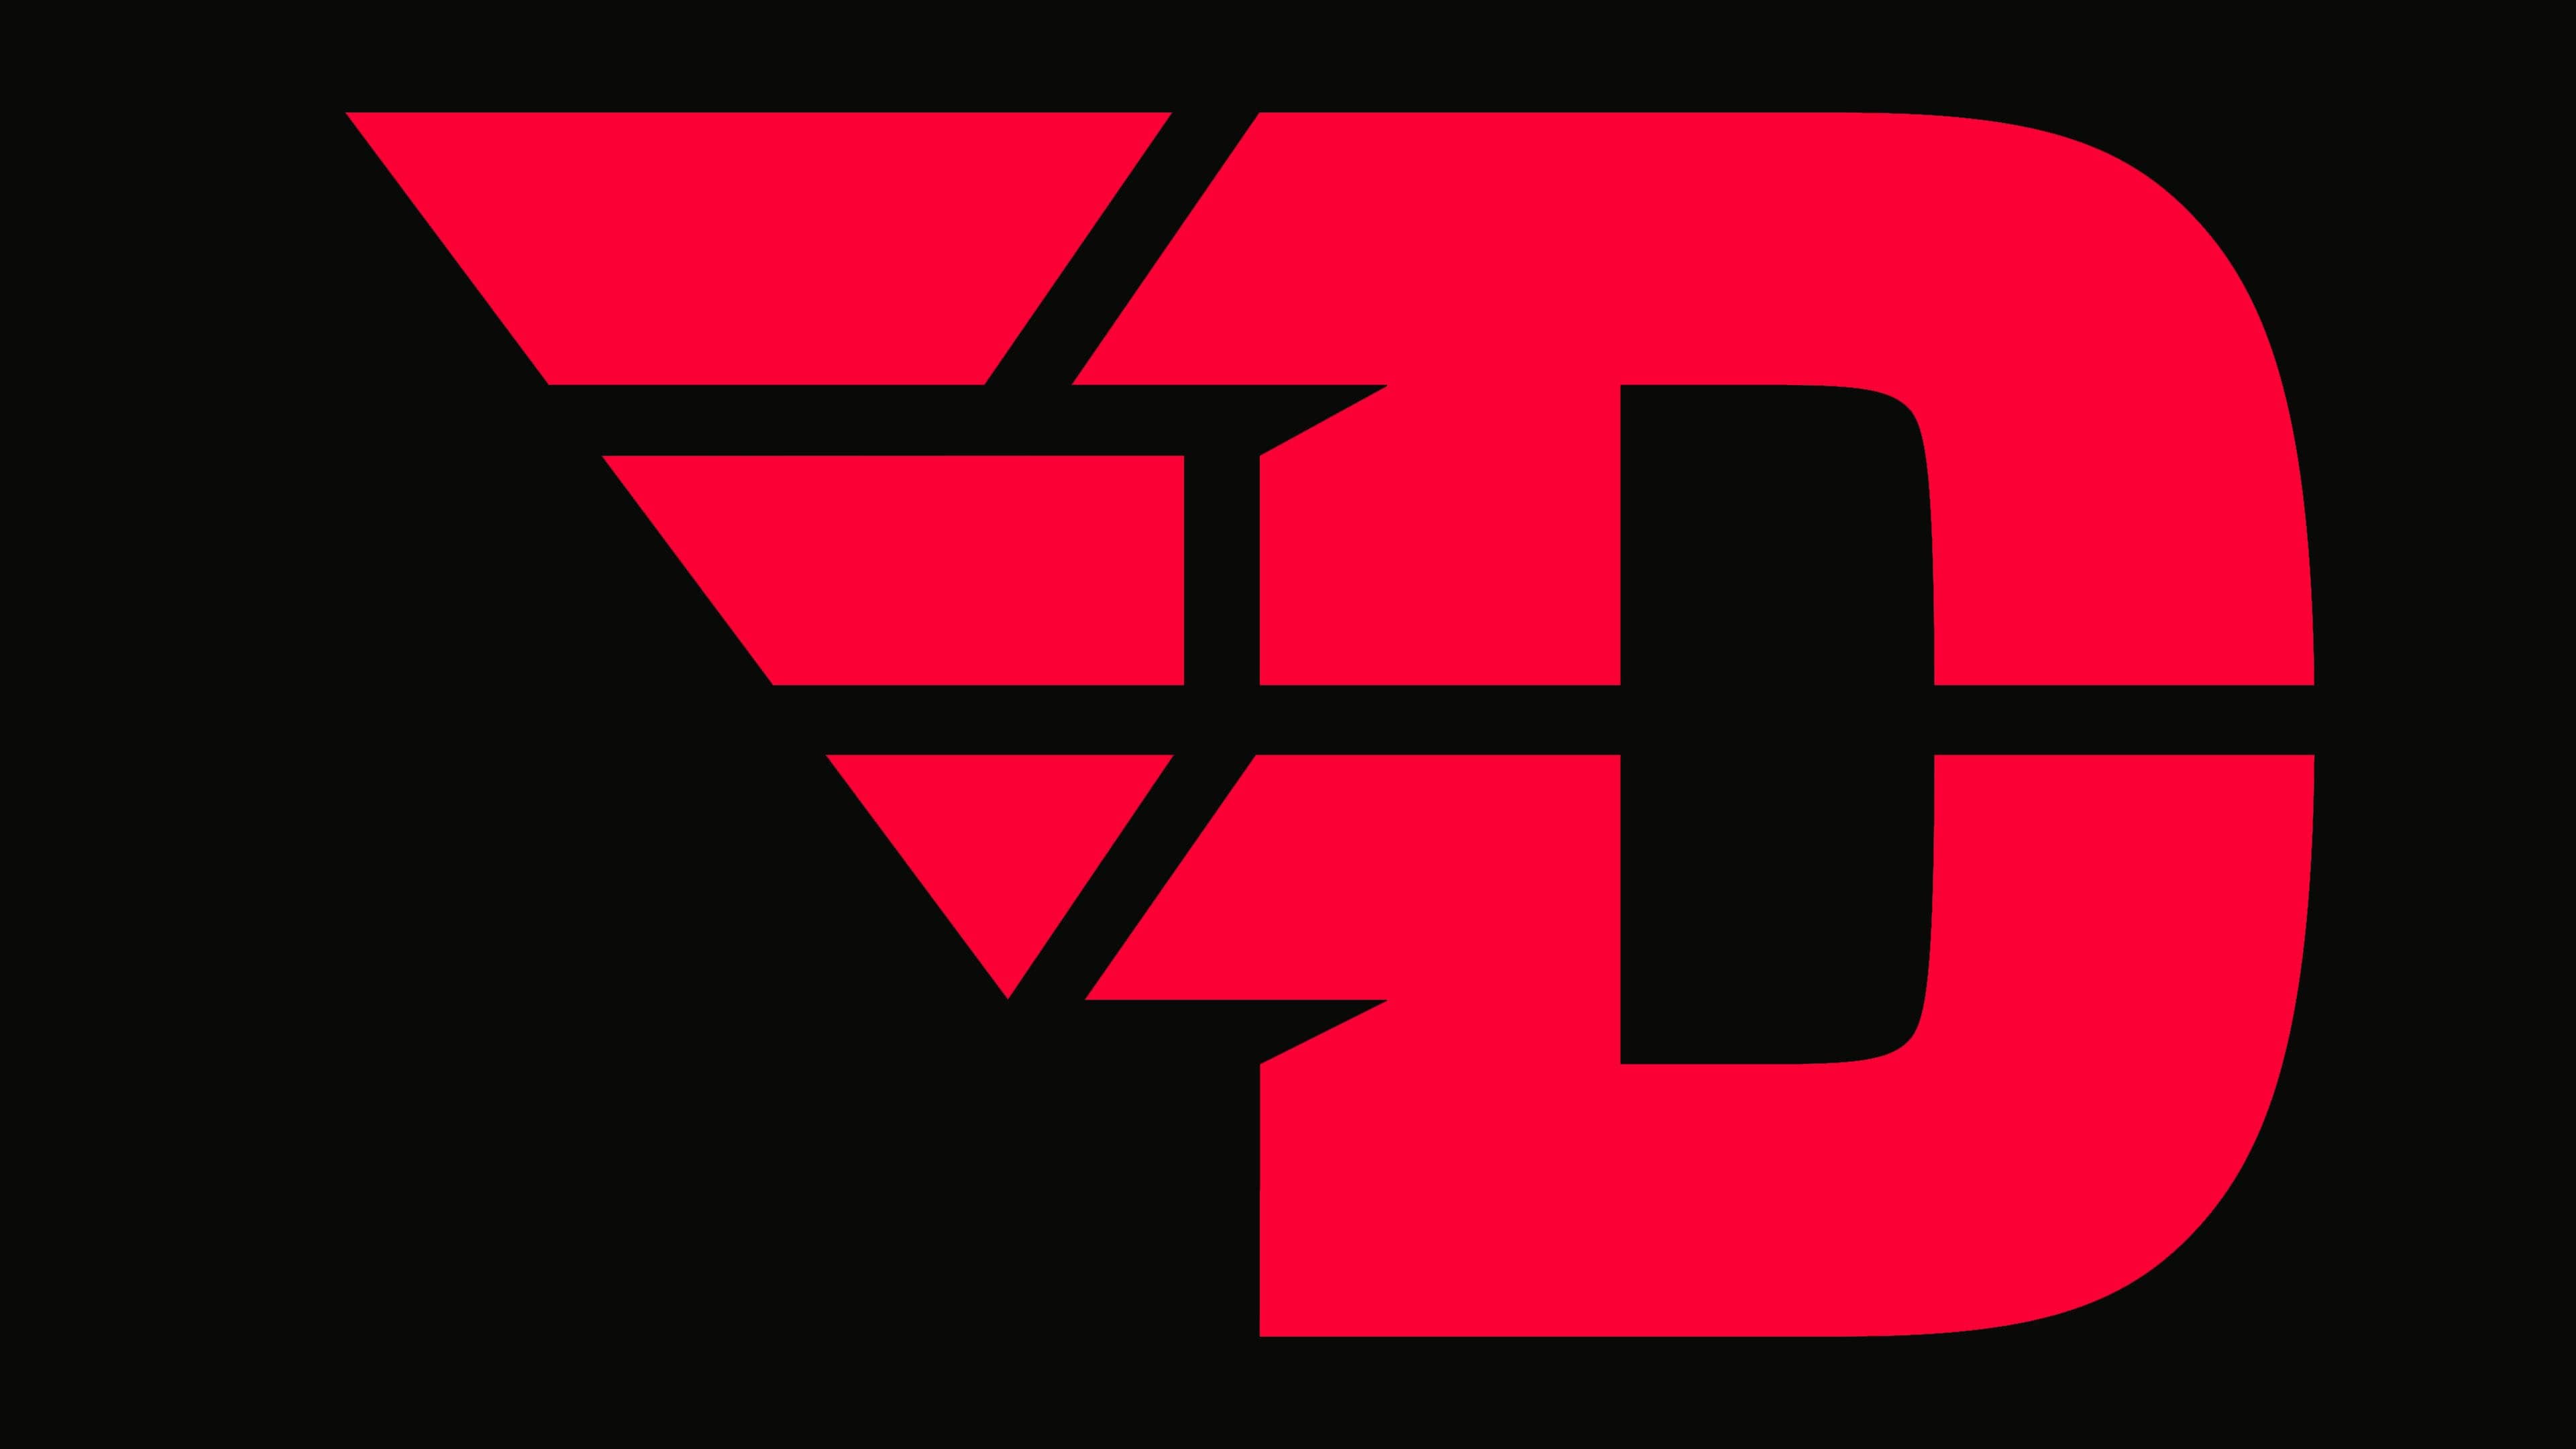 Dayton Flyers Logo And Symbol, Meaning, History, PNG, Brand | vlr.eng.br